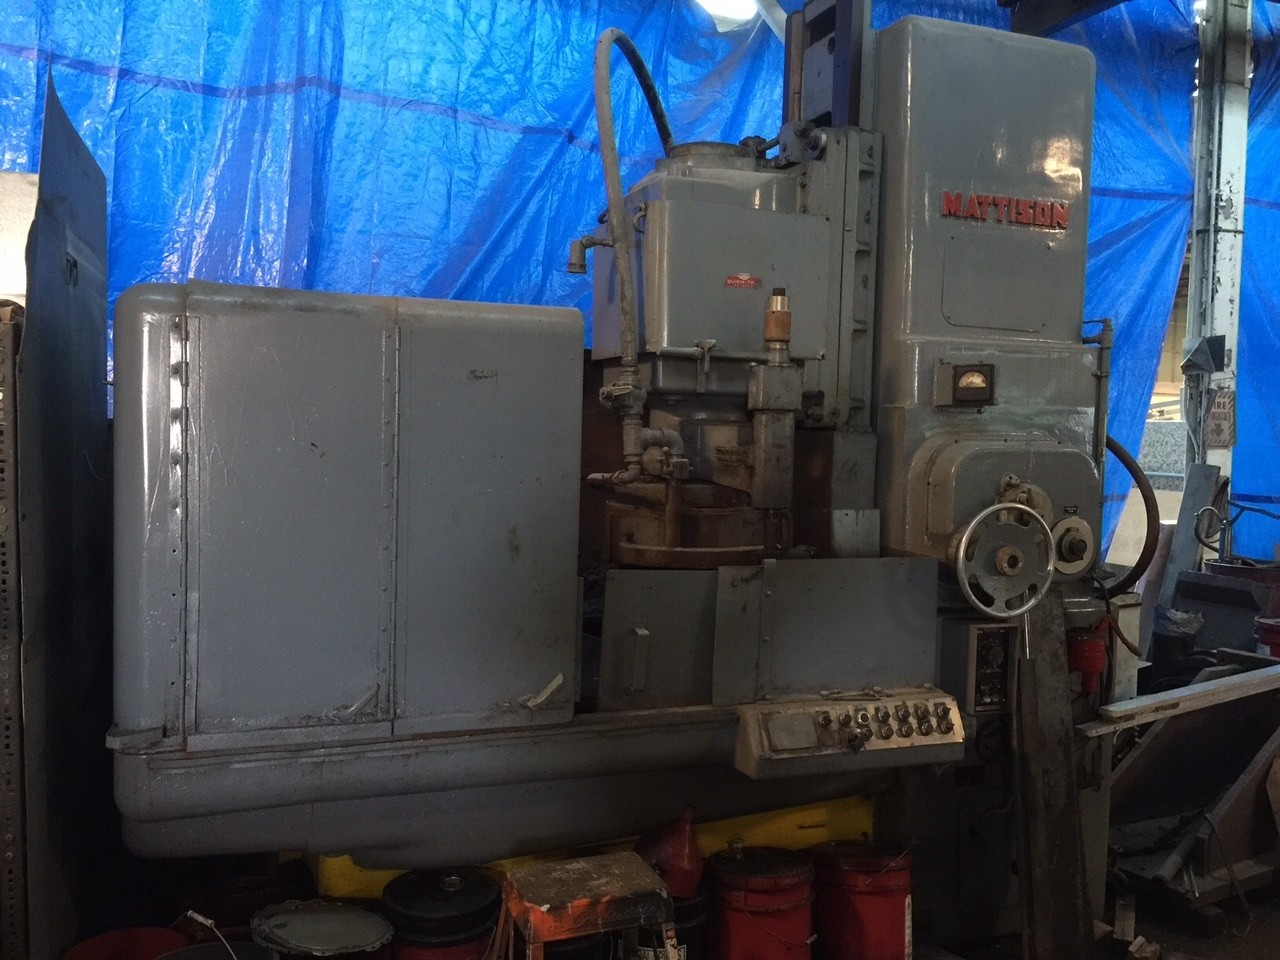 42" Mattison Rotary Surface Grinder For Sale